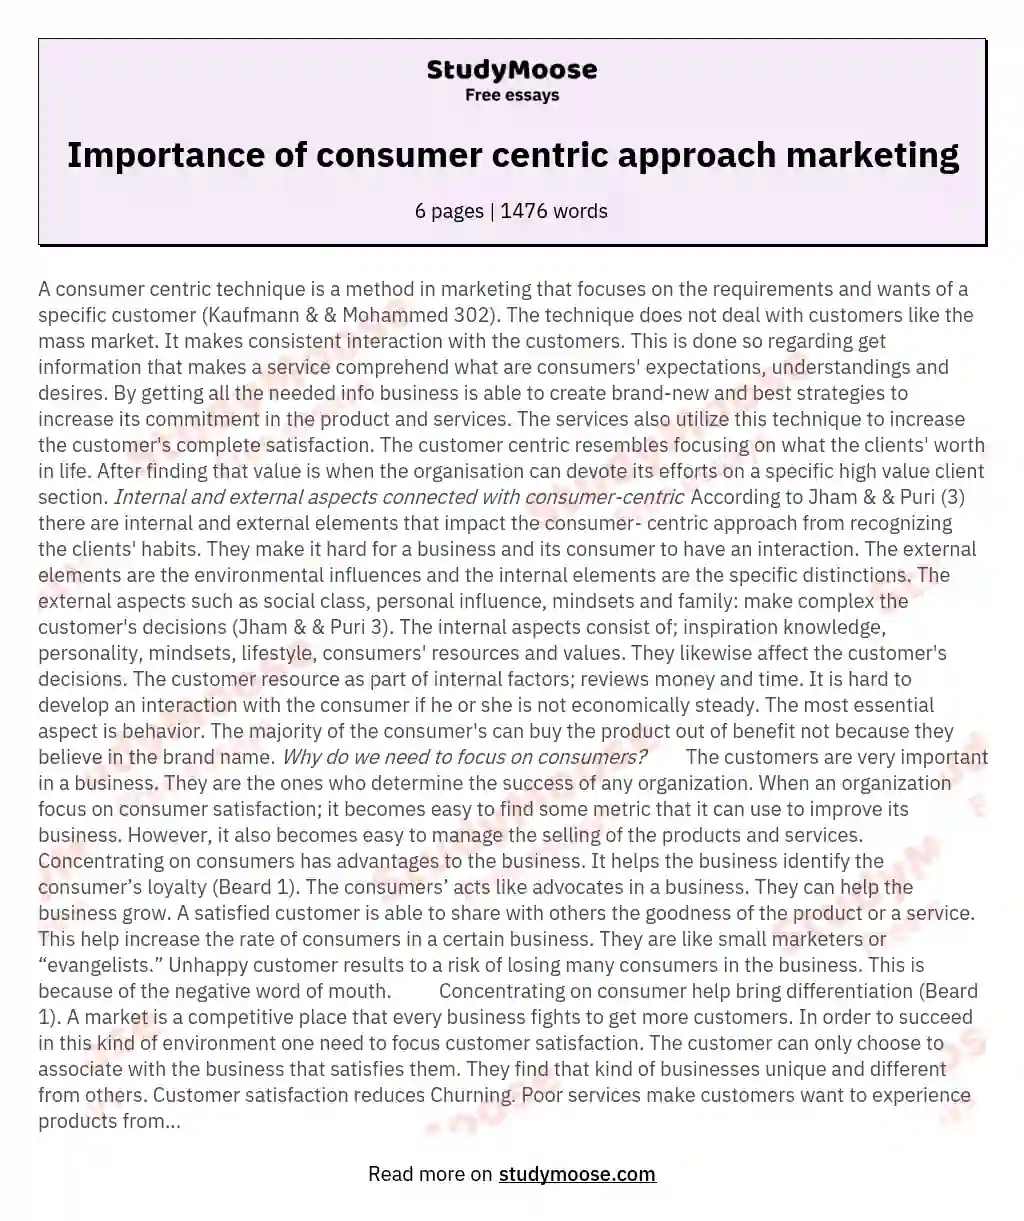 Importance of consumer centric approach marketing essay